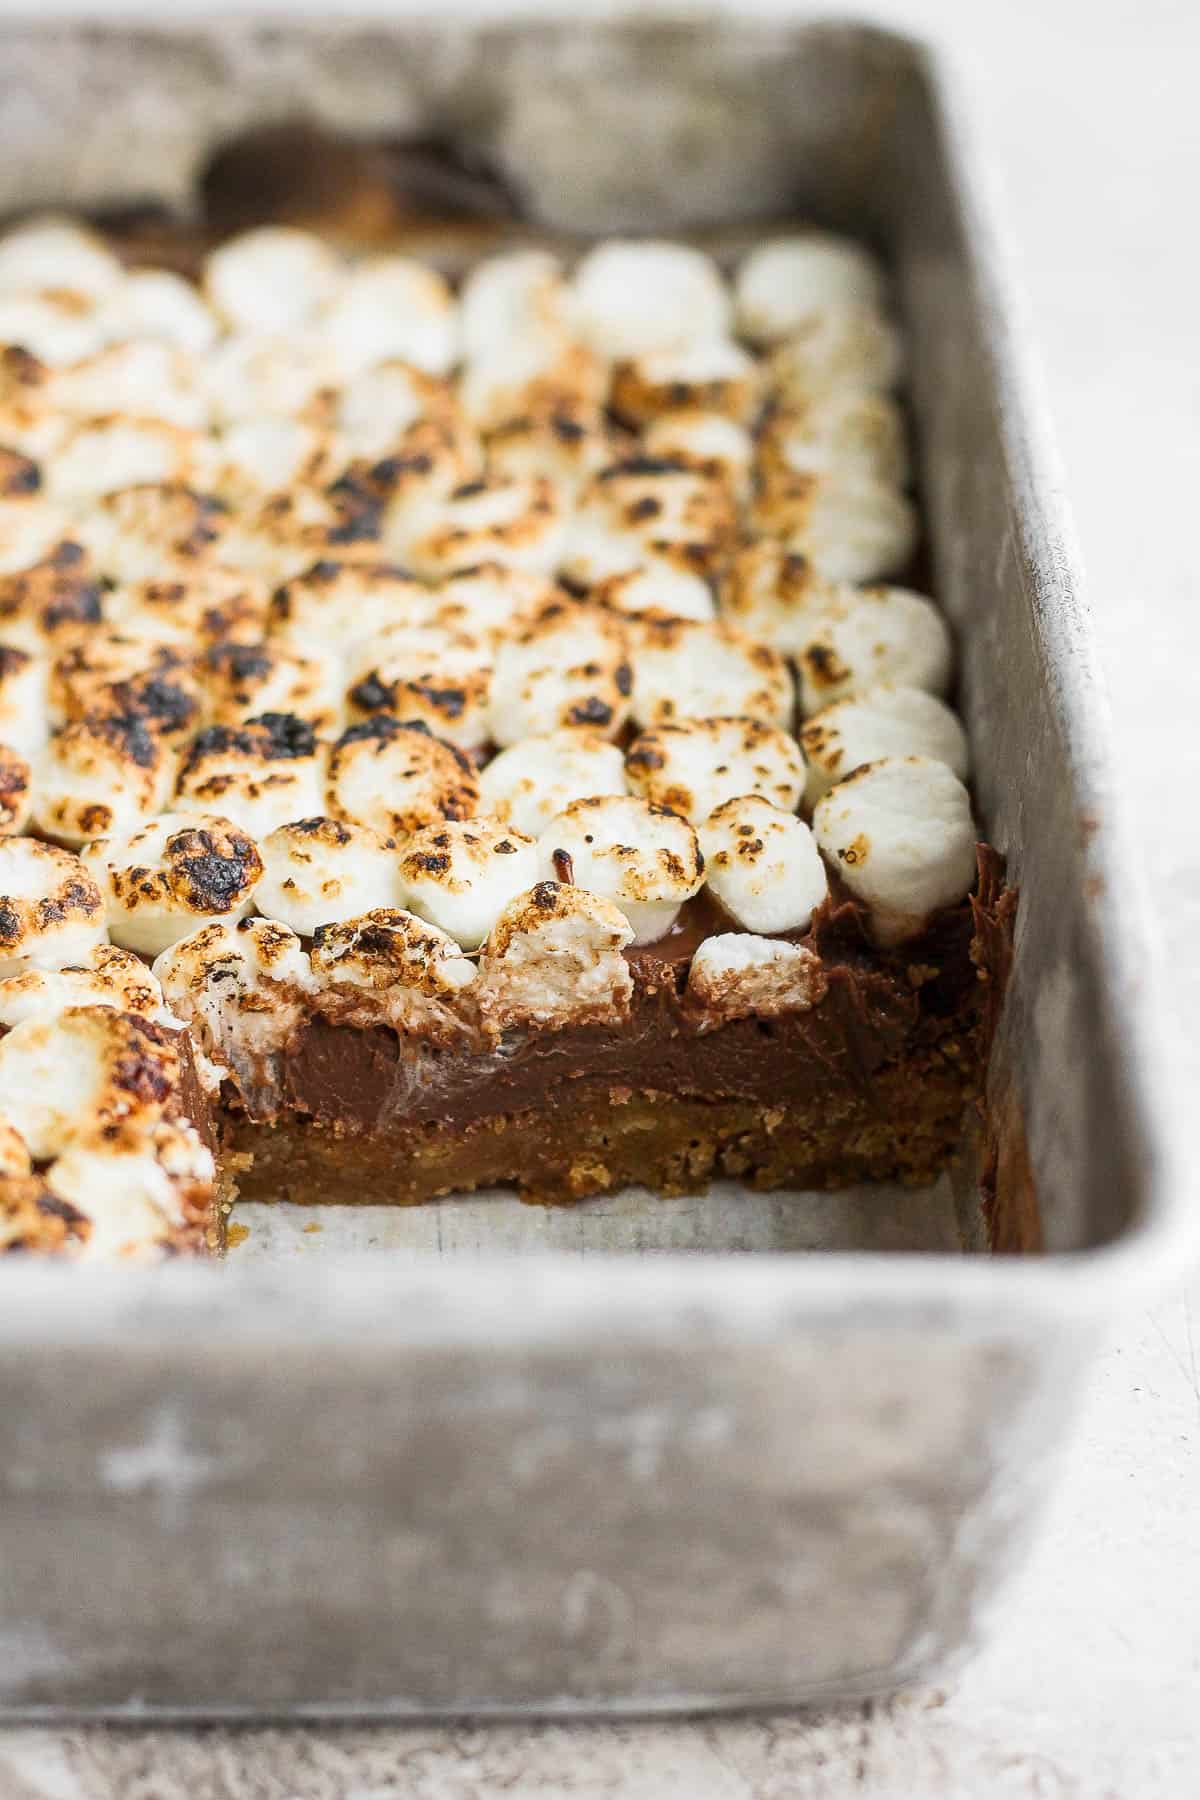 S'mores bars in the baking pan.